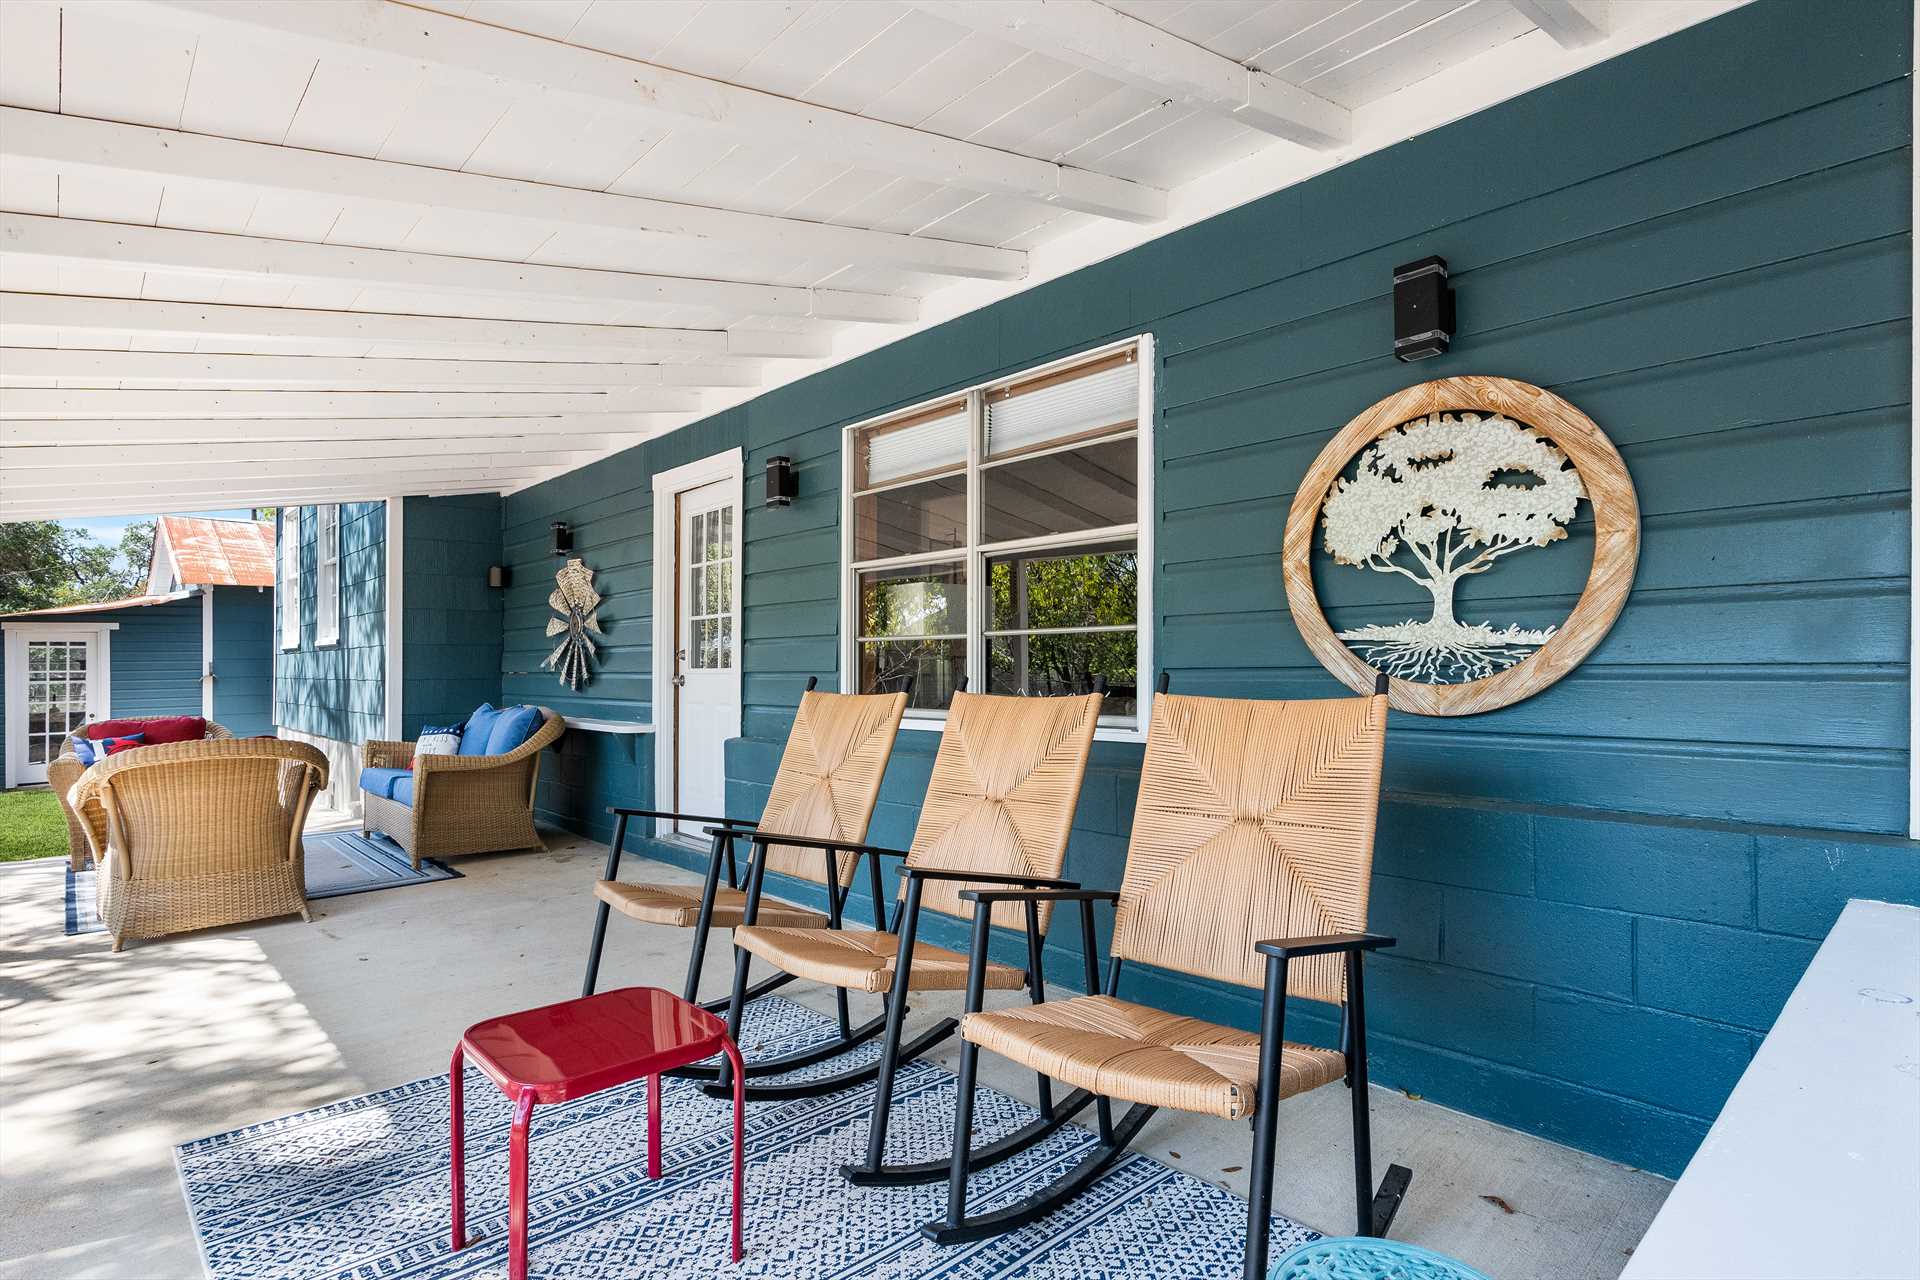                                                 Rock away a few calm and tranquil moments on the shaded comfort of the spacious porch!